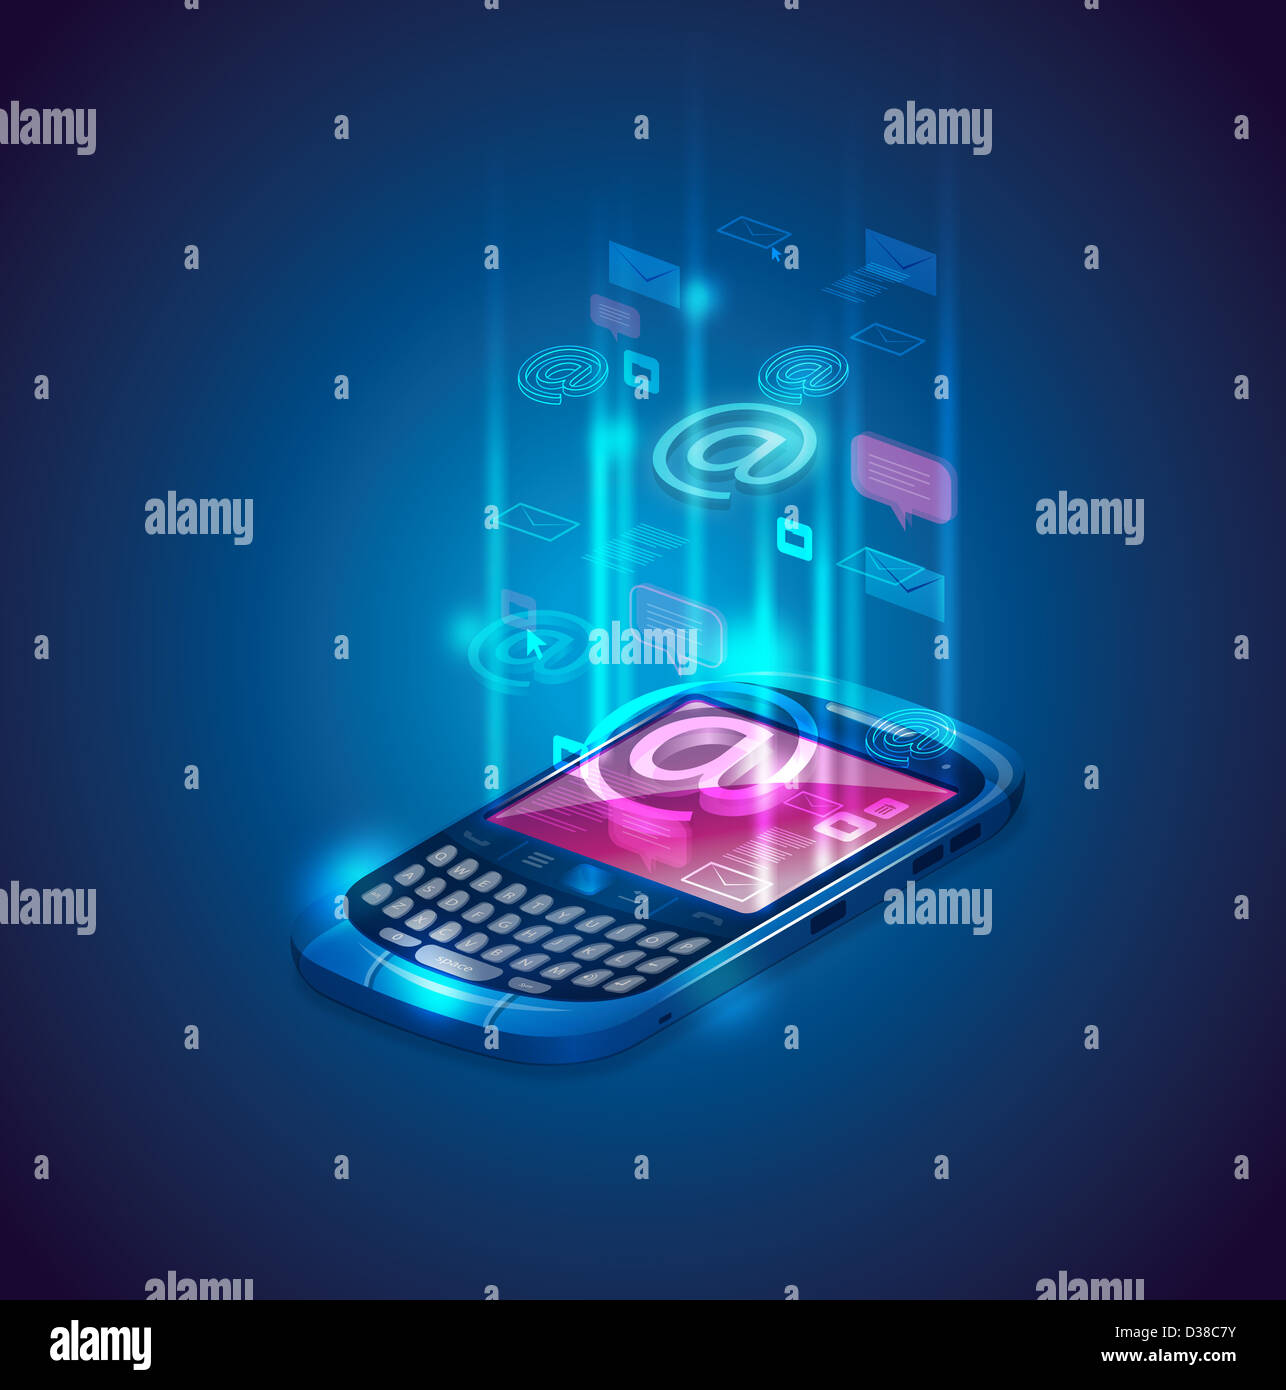 Illustrative image of mobile phone representing business networking Stock Photo